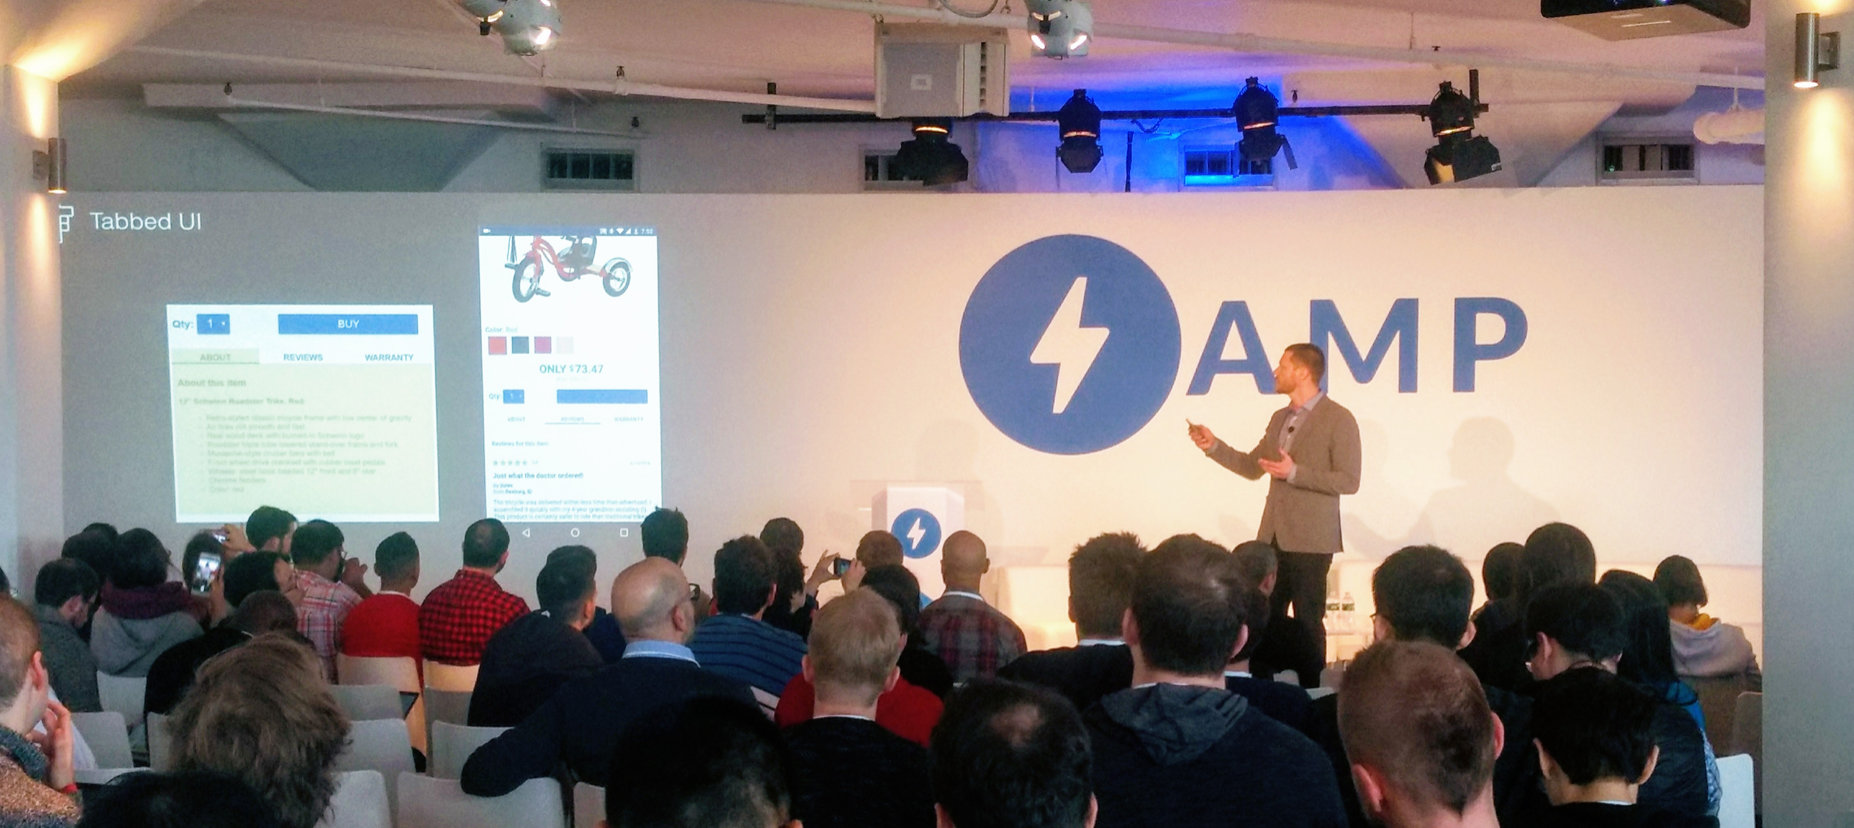 WompMobile CEO presents at first-ever AMP Conf 2017 in New York